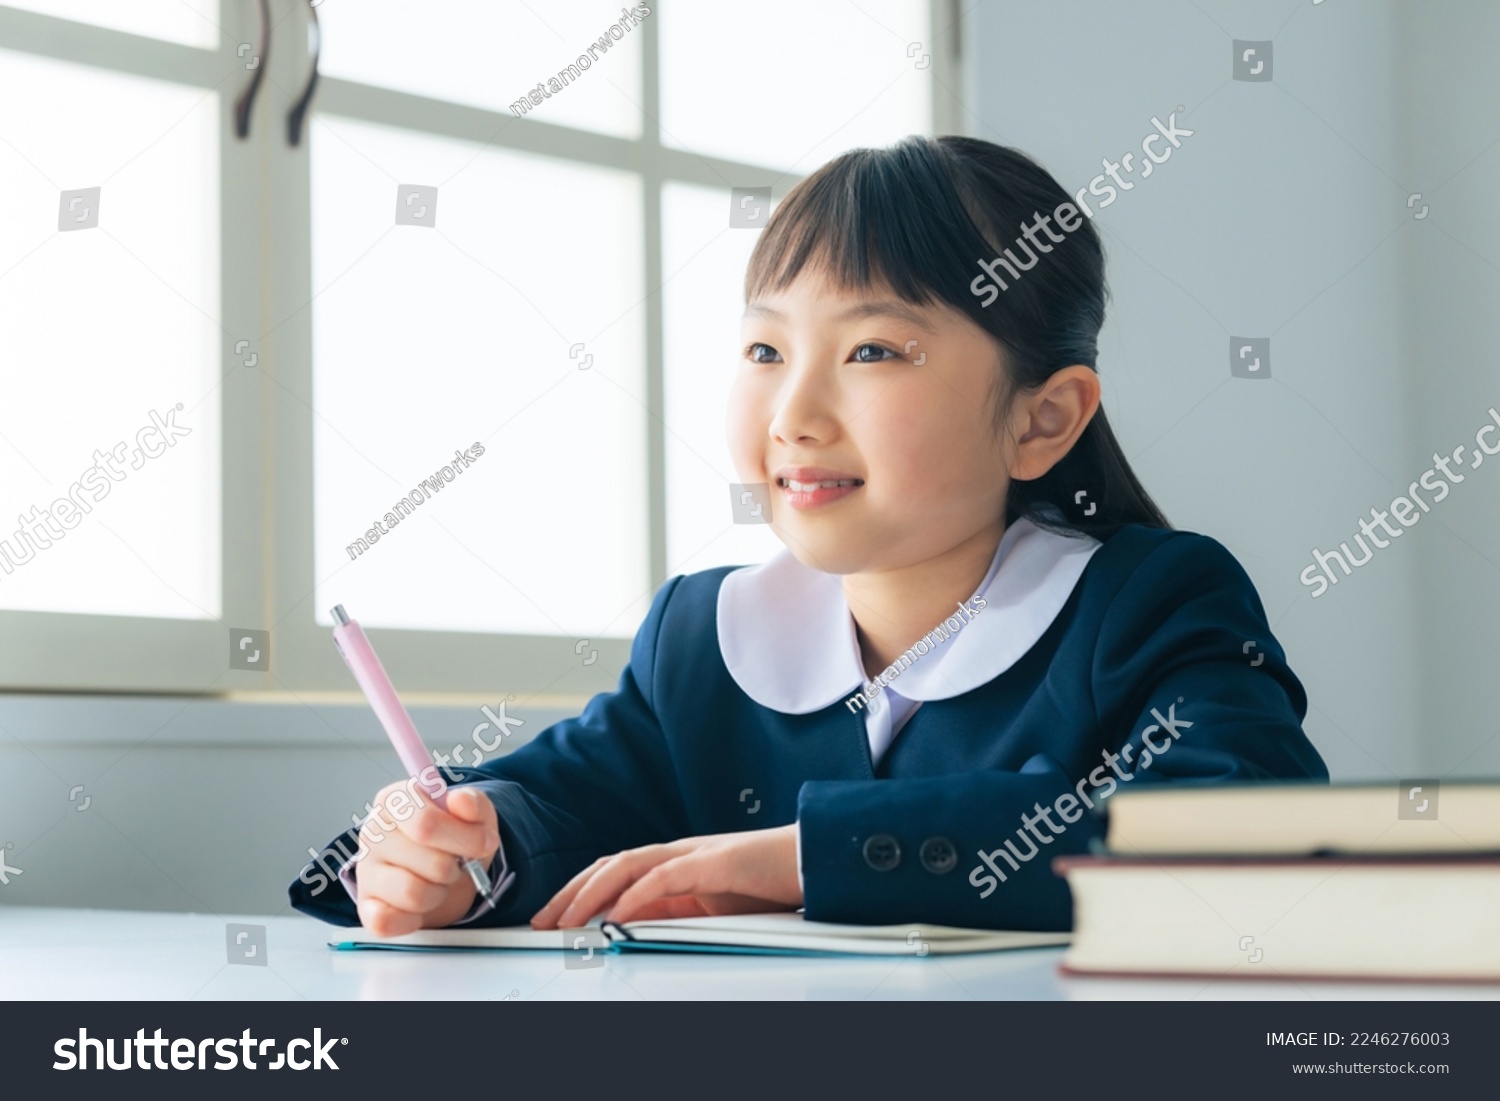 Asian elementary school student studying in the classroom. #2246276003